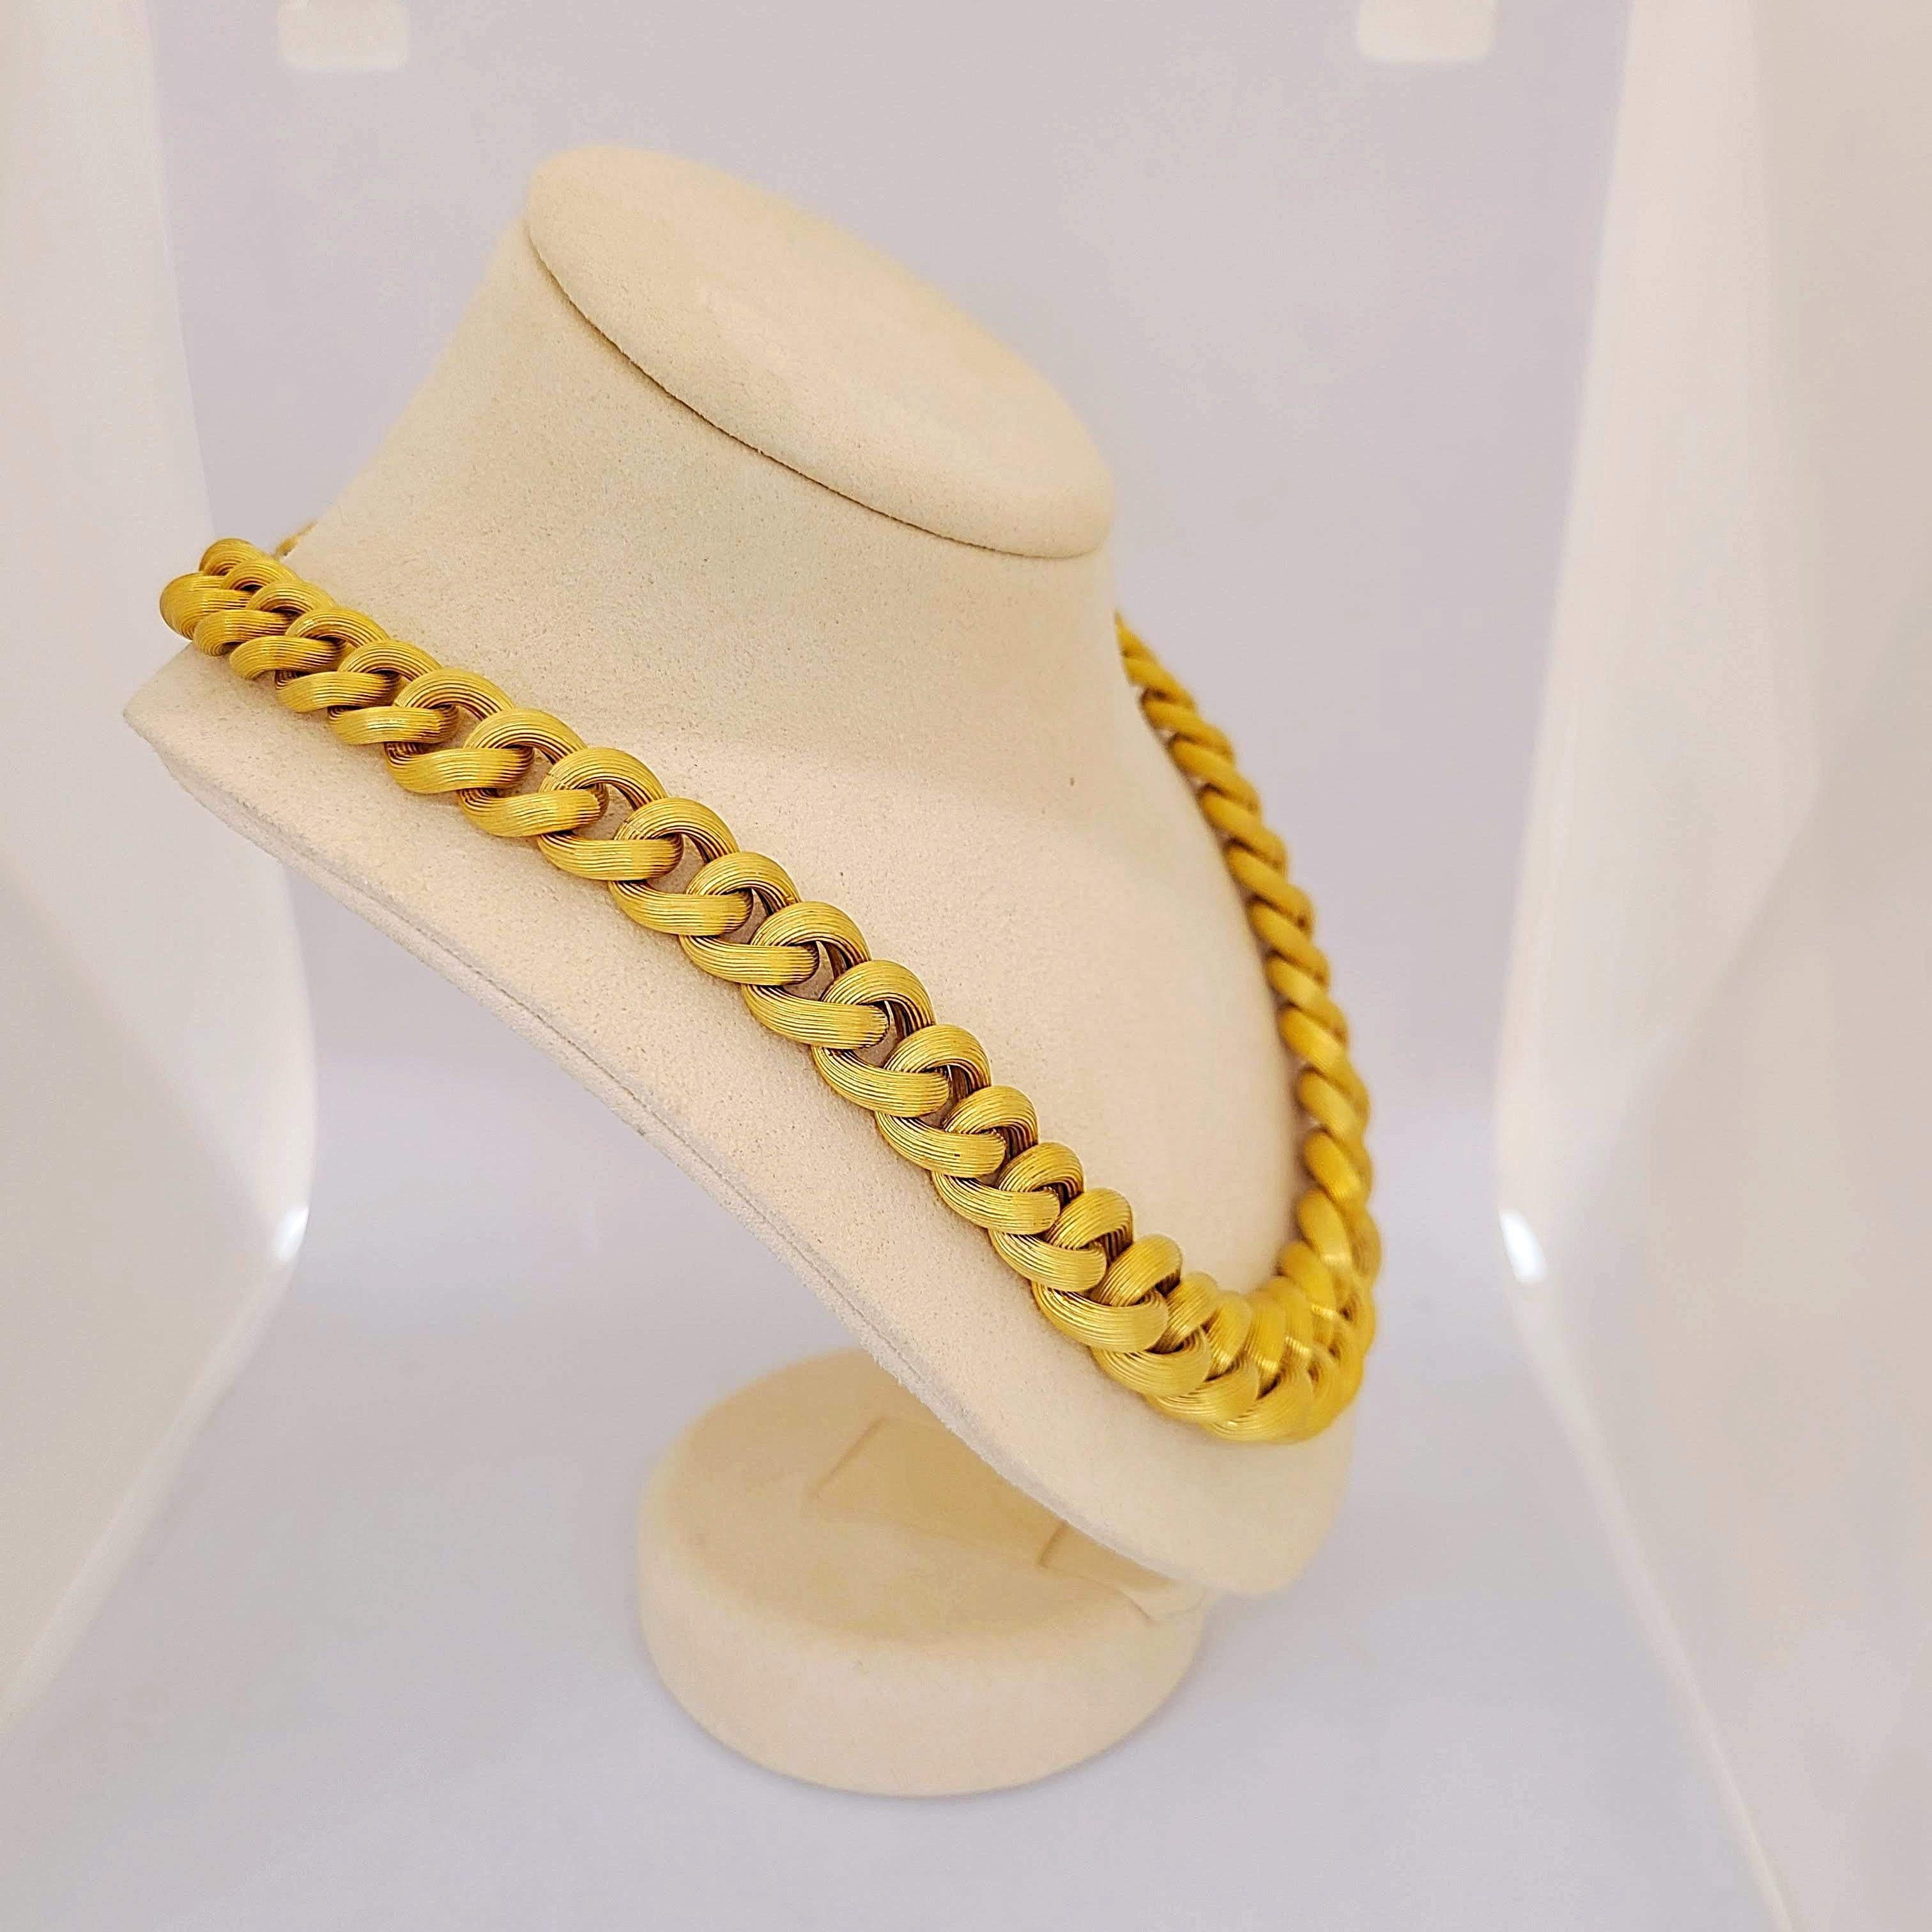 Contemporary 18 Karat Yellow Gold Italian Curbed Link Chain Necklace